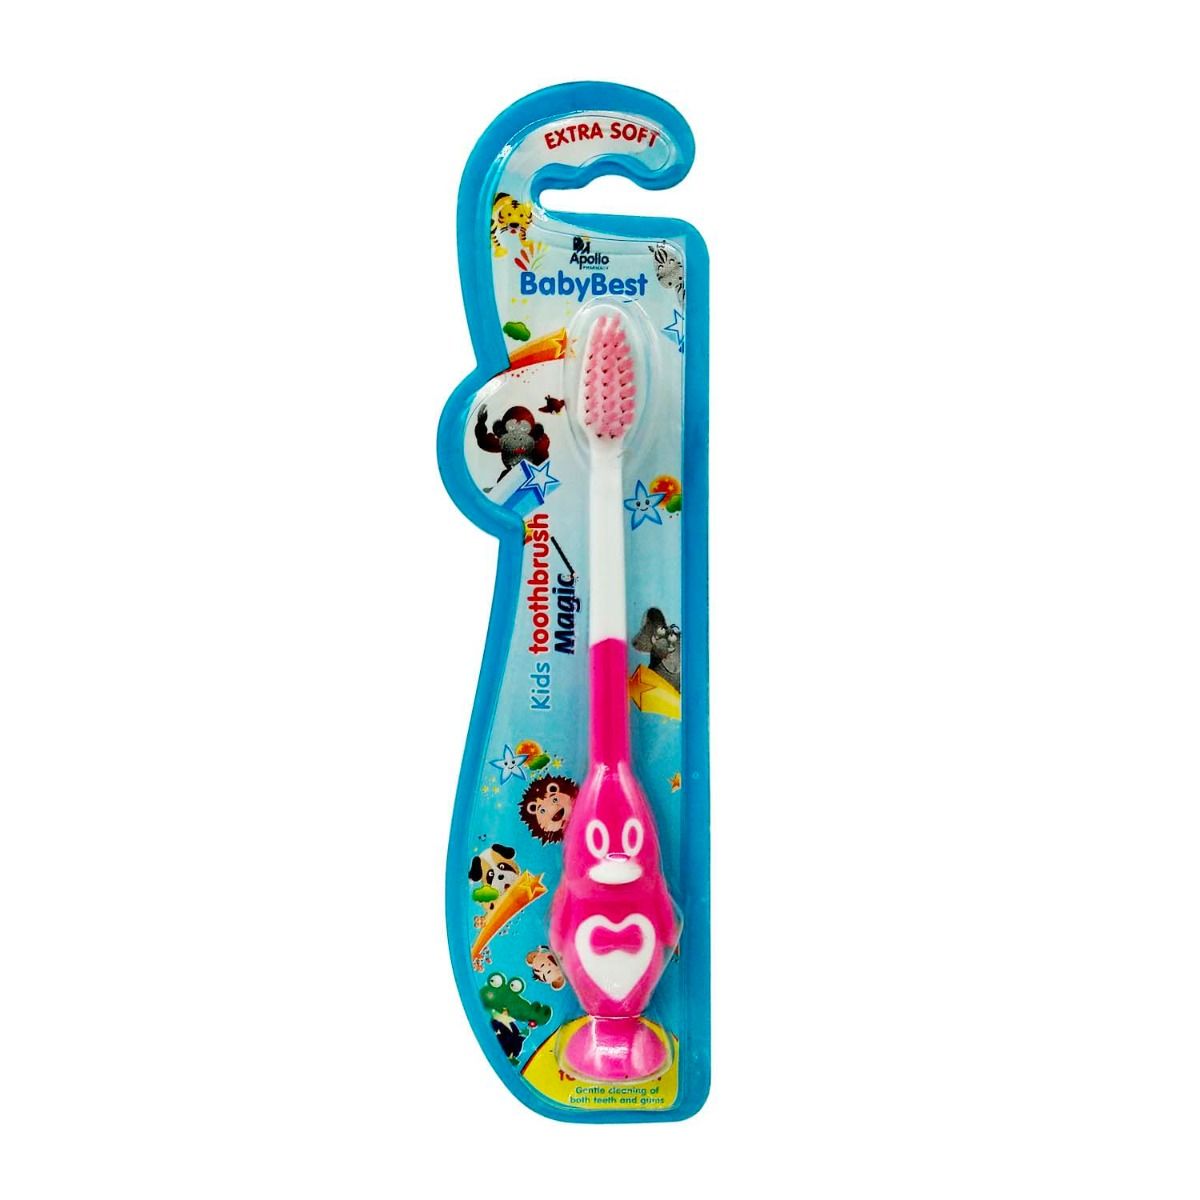 Apollo Pharmacy Baby Best Magic Extra Soft Kids Toothbrush, 1 Count, Pack of 1 